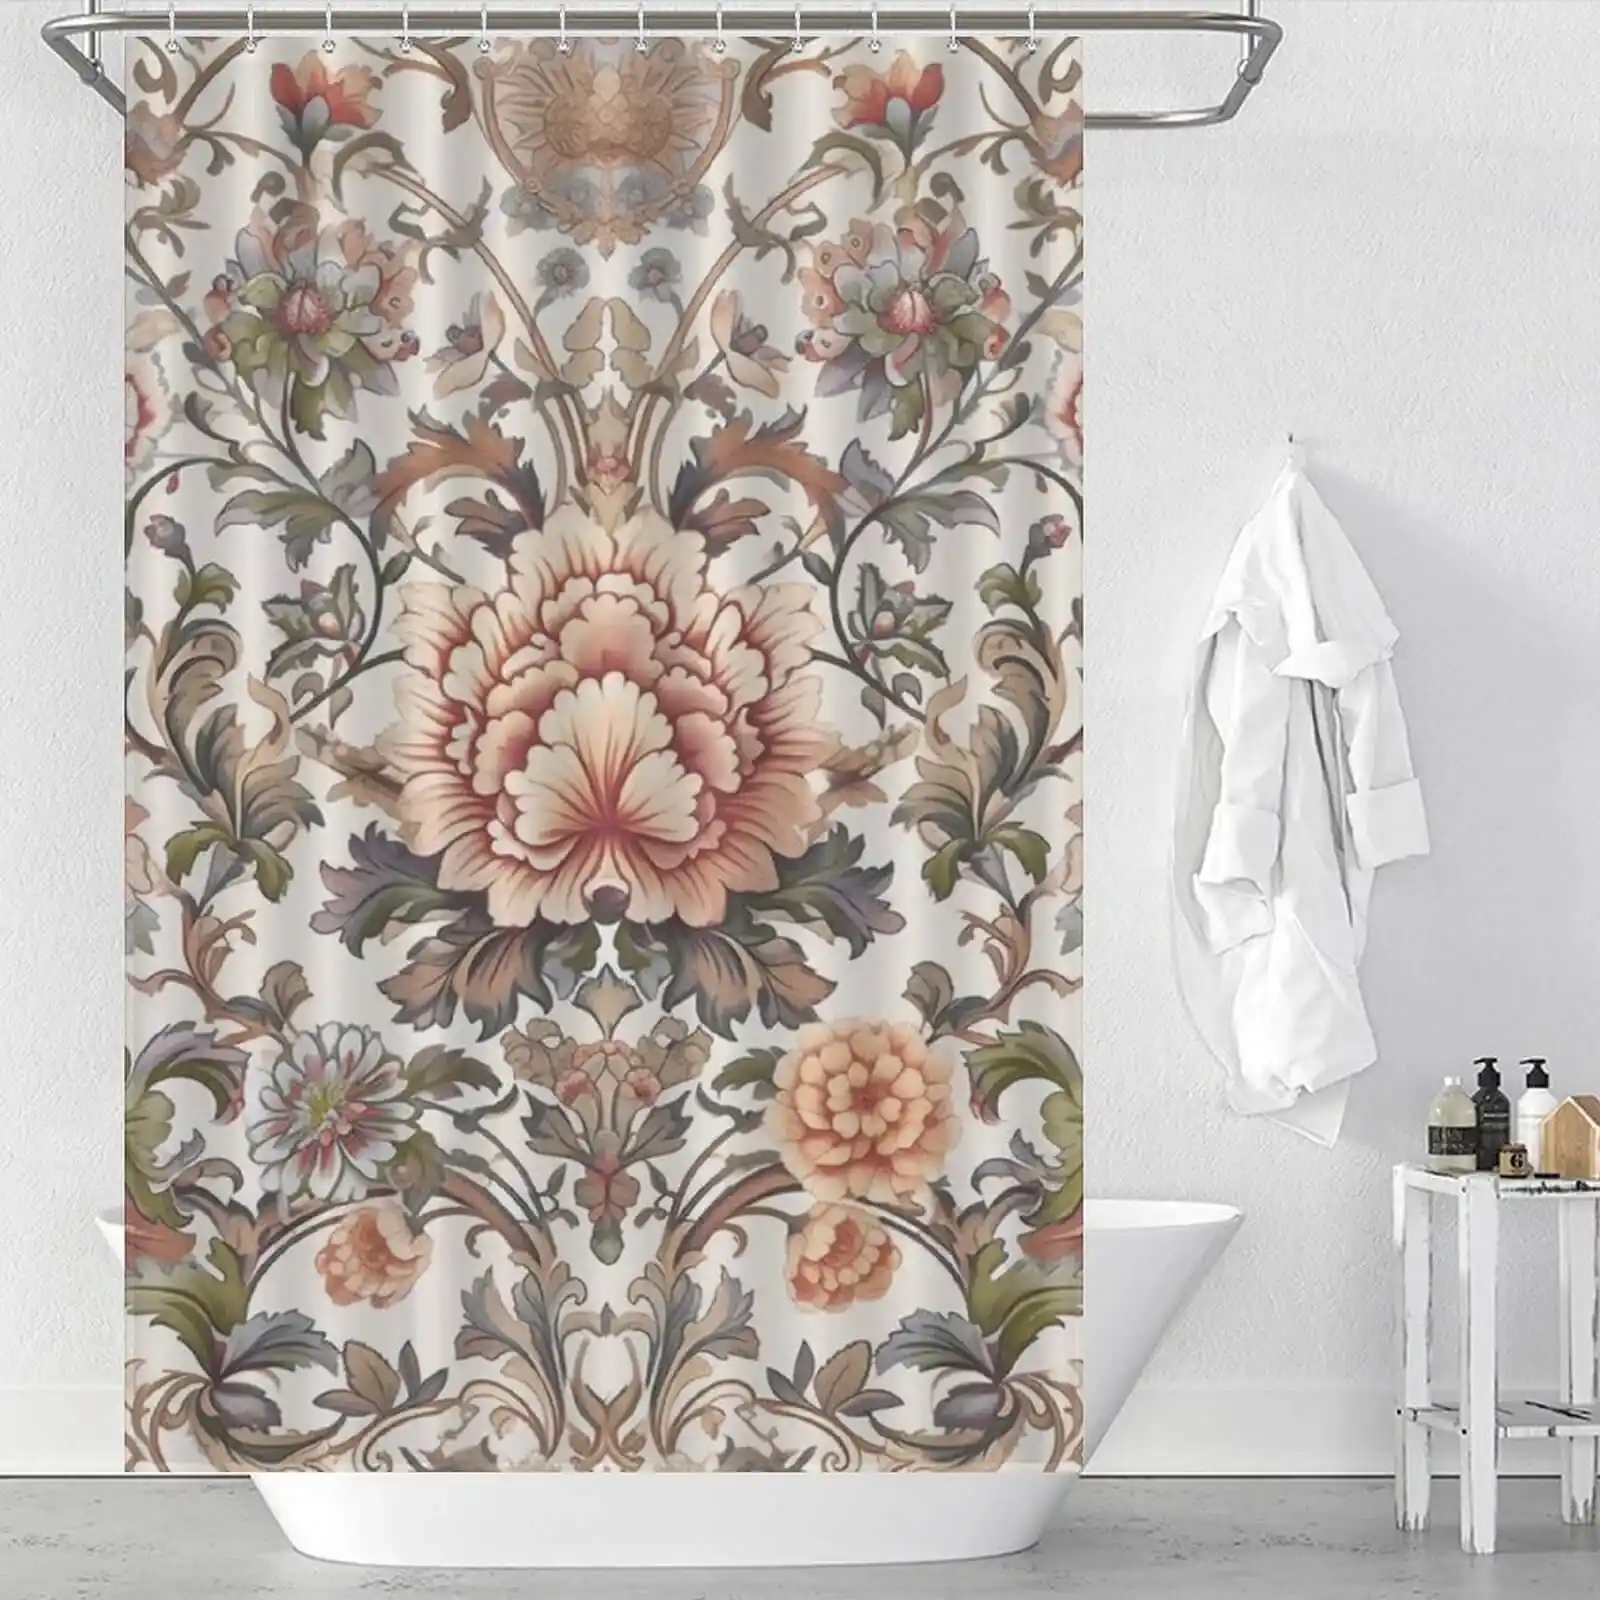 Unique Shower Curtains for Small Bathrooms: An ornate shower curtain with flowers on it.